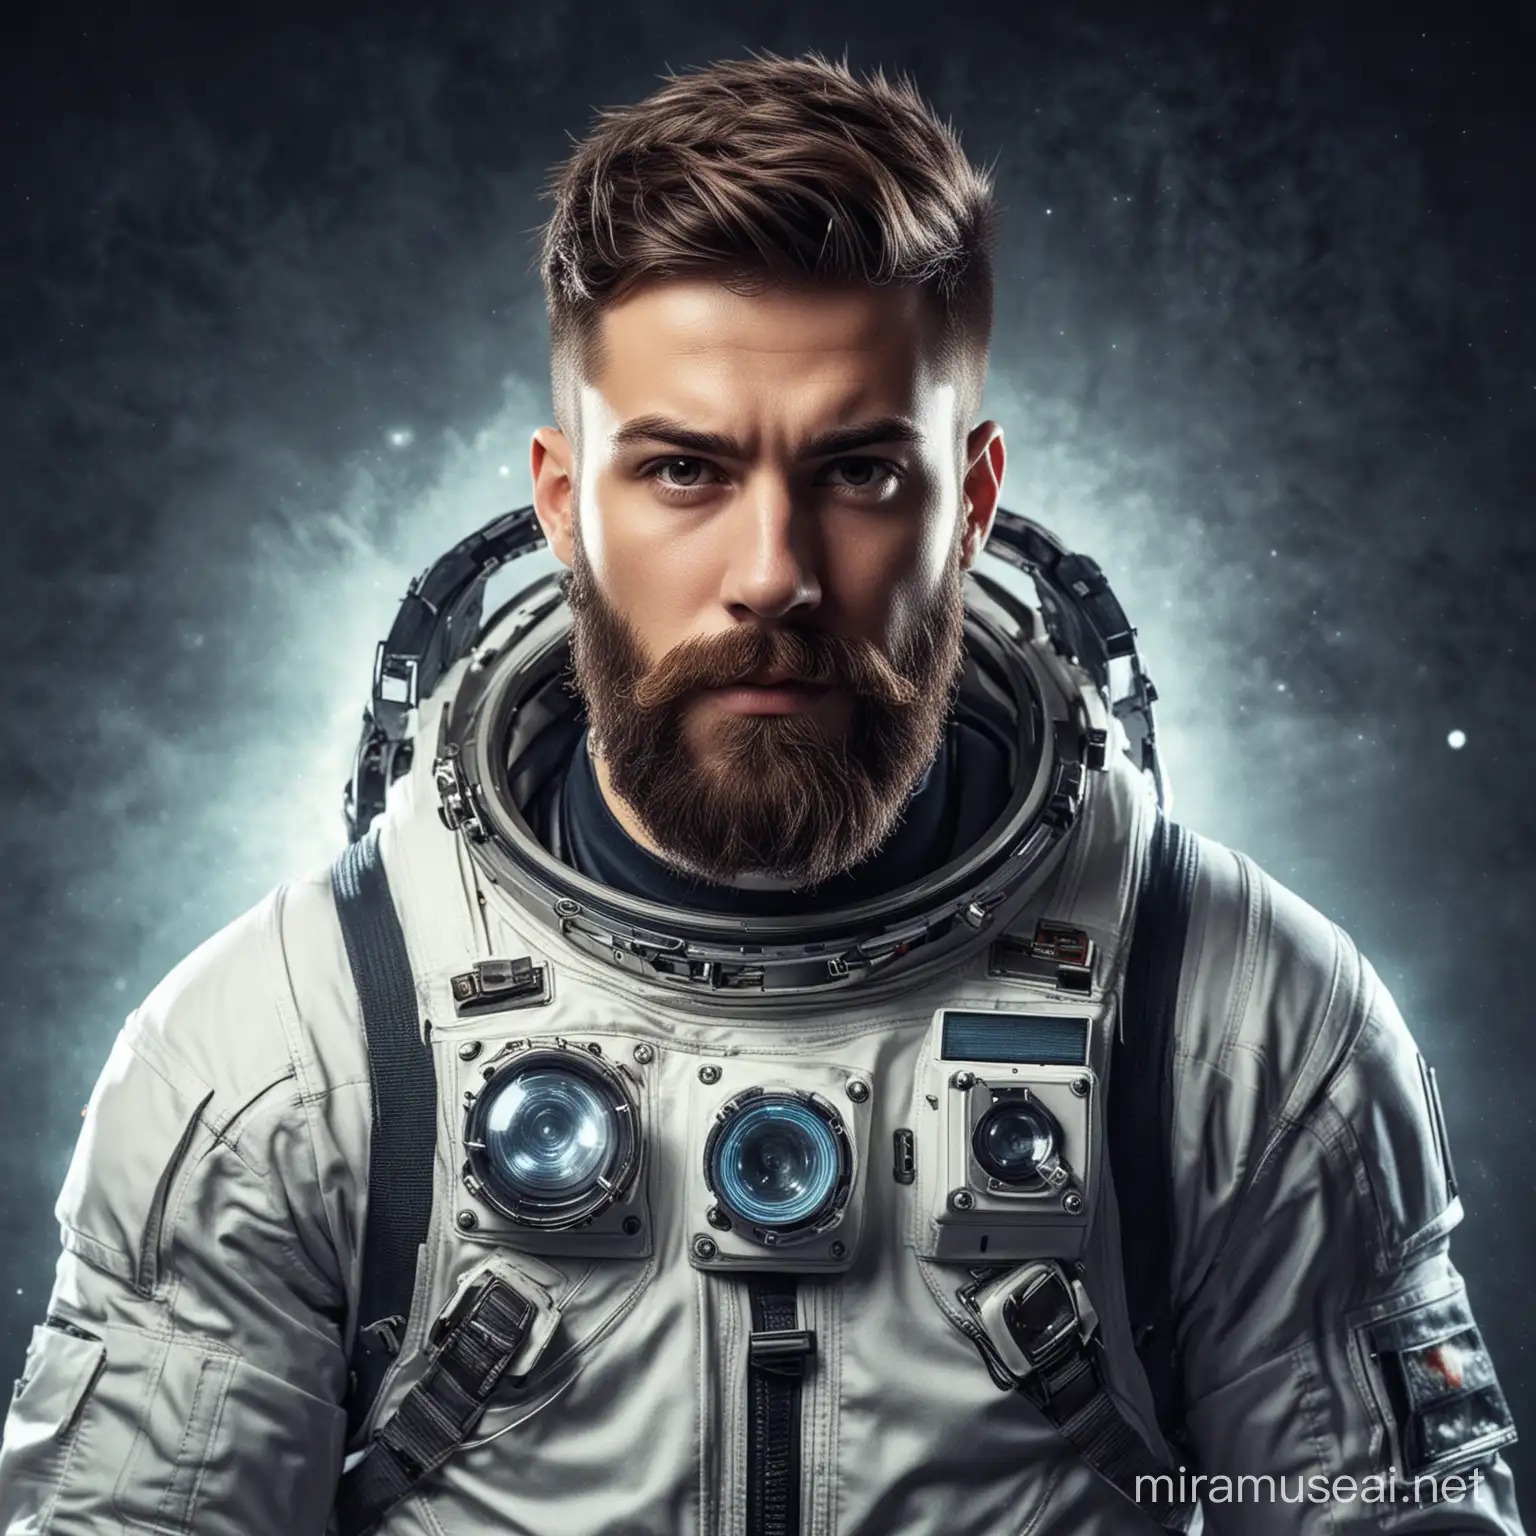 young muscular astronaut with beard and he has electric powers